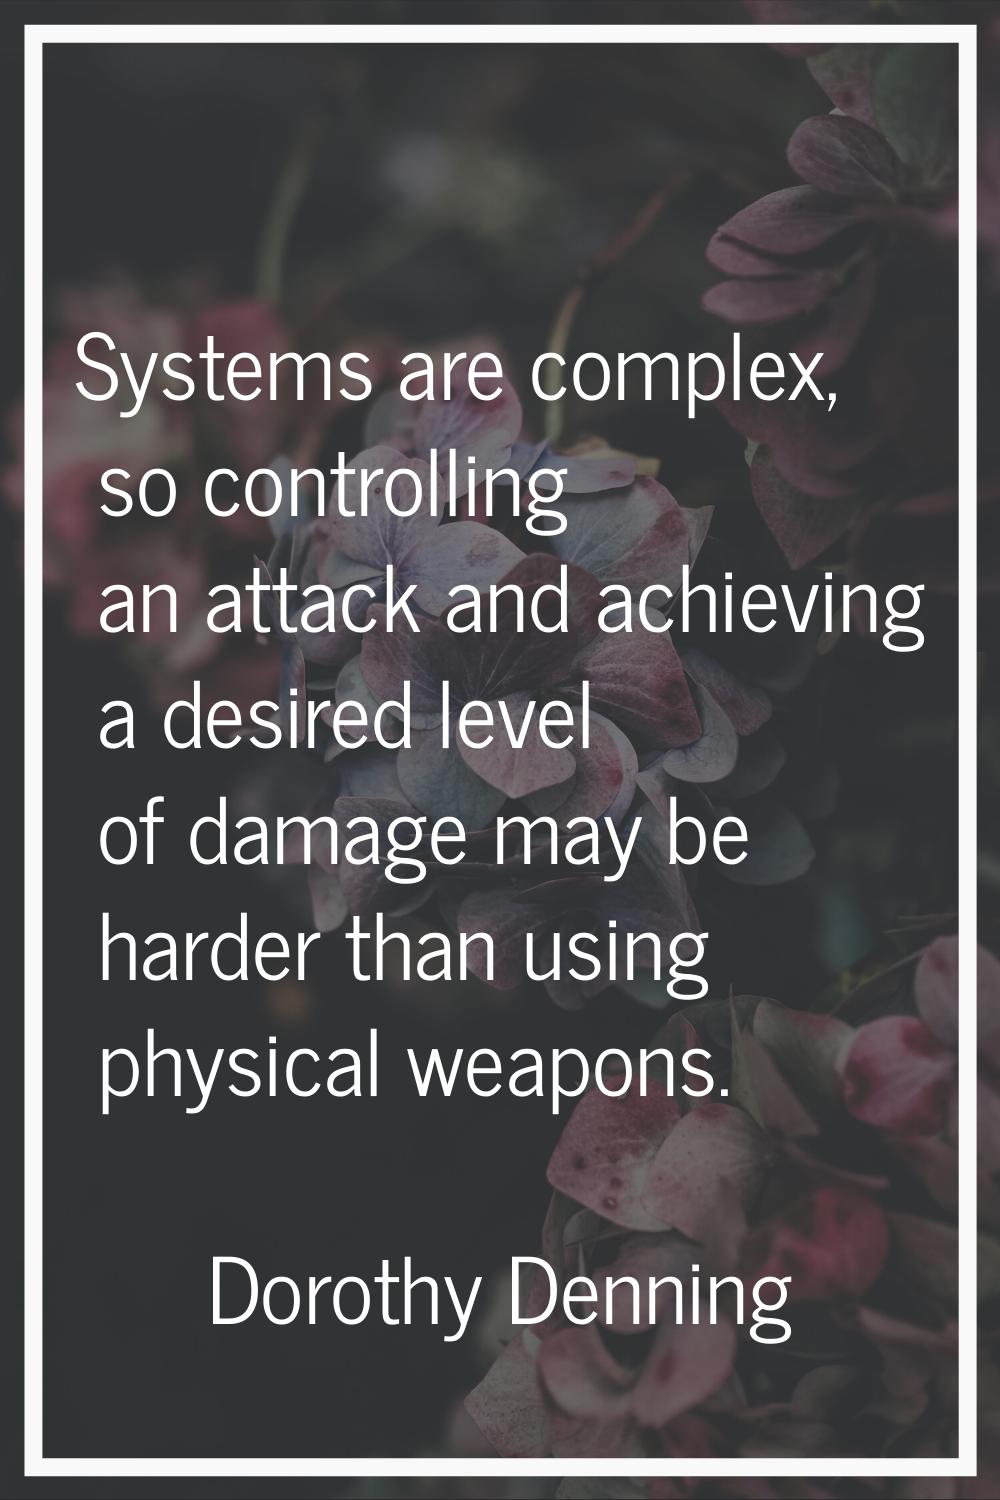 Systems are complex, so controlling an attack and achieving a desired level of damage may be harder